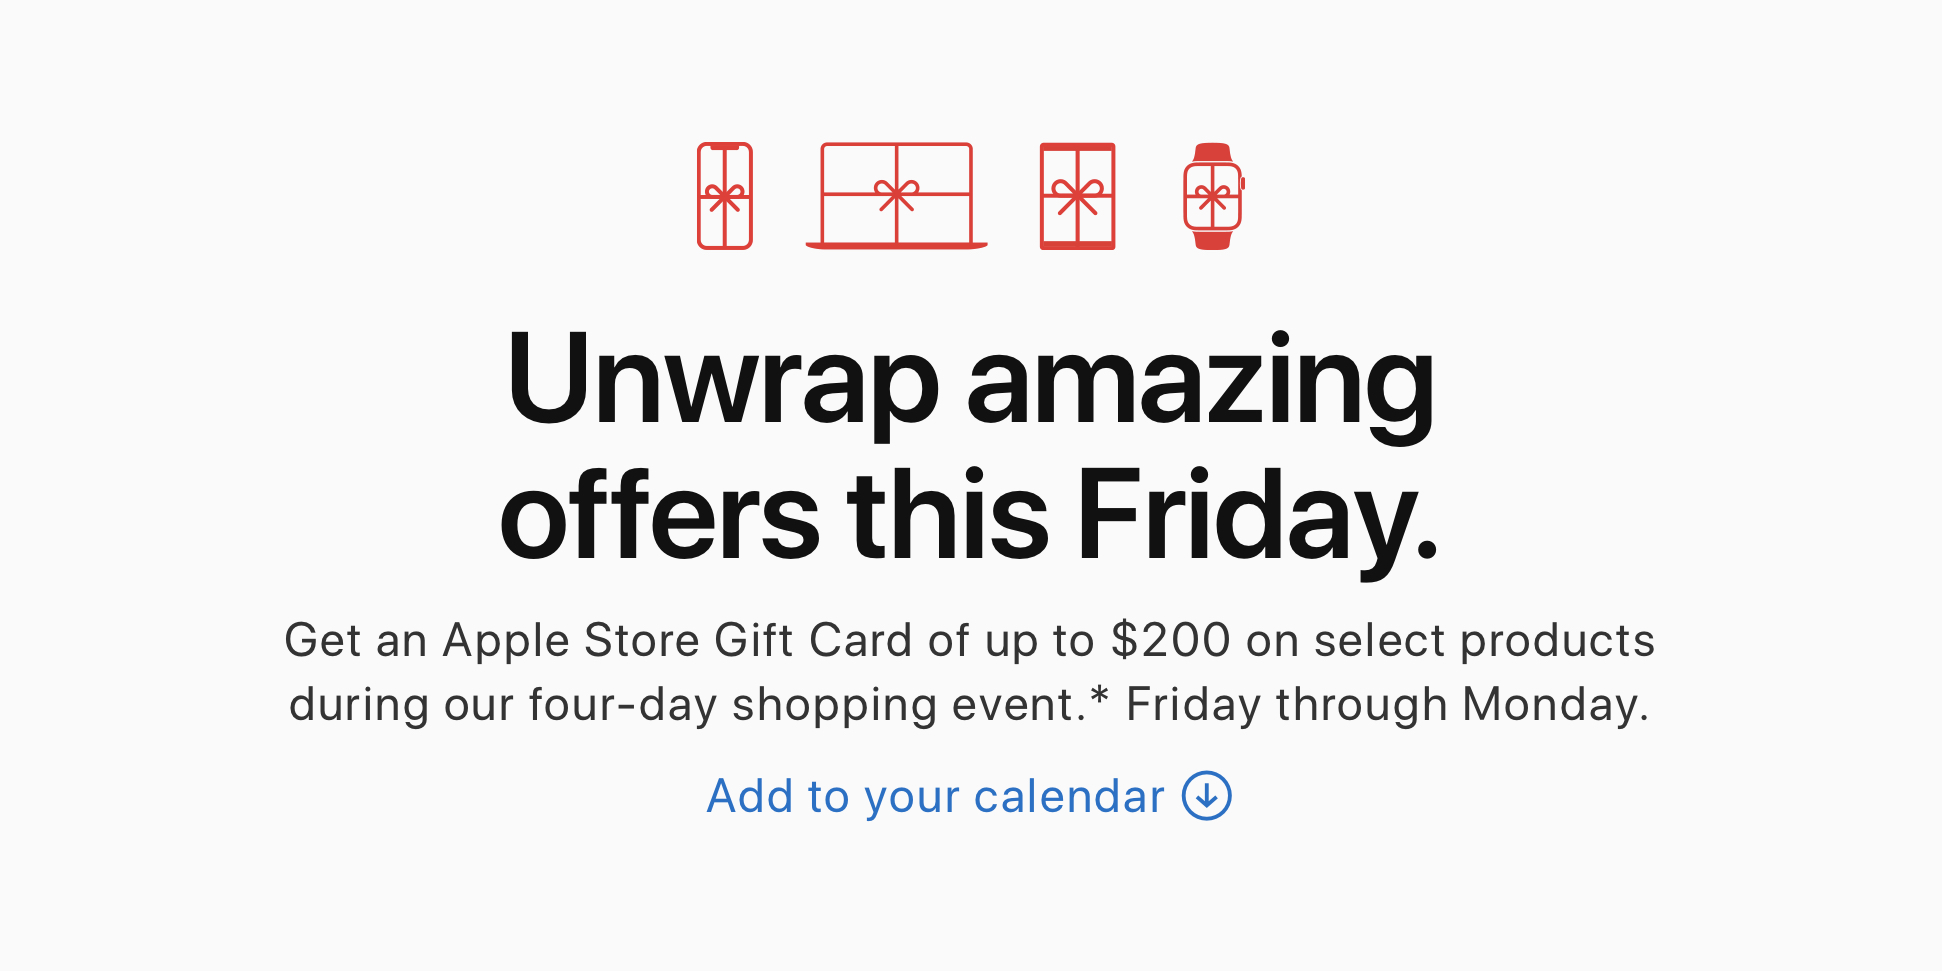 Apple announces its Black Friday deals up to 200 Apple Store gift